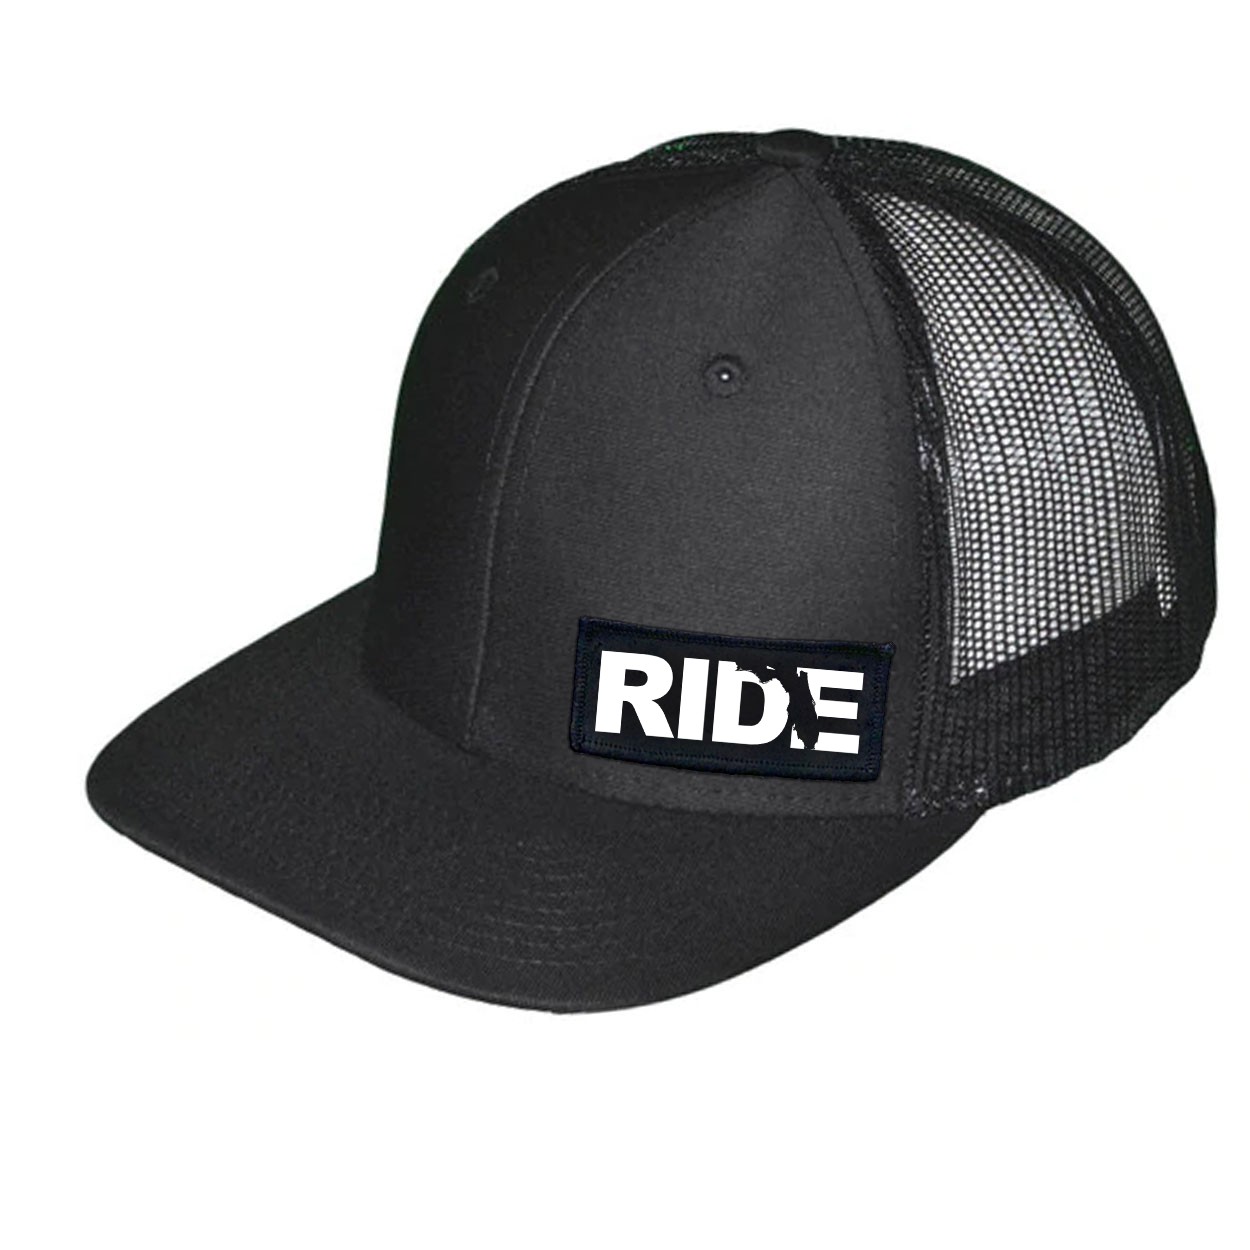 Ride Florida Night Out Woven Patch Snapback Trucker Hat Black (White Logo)